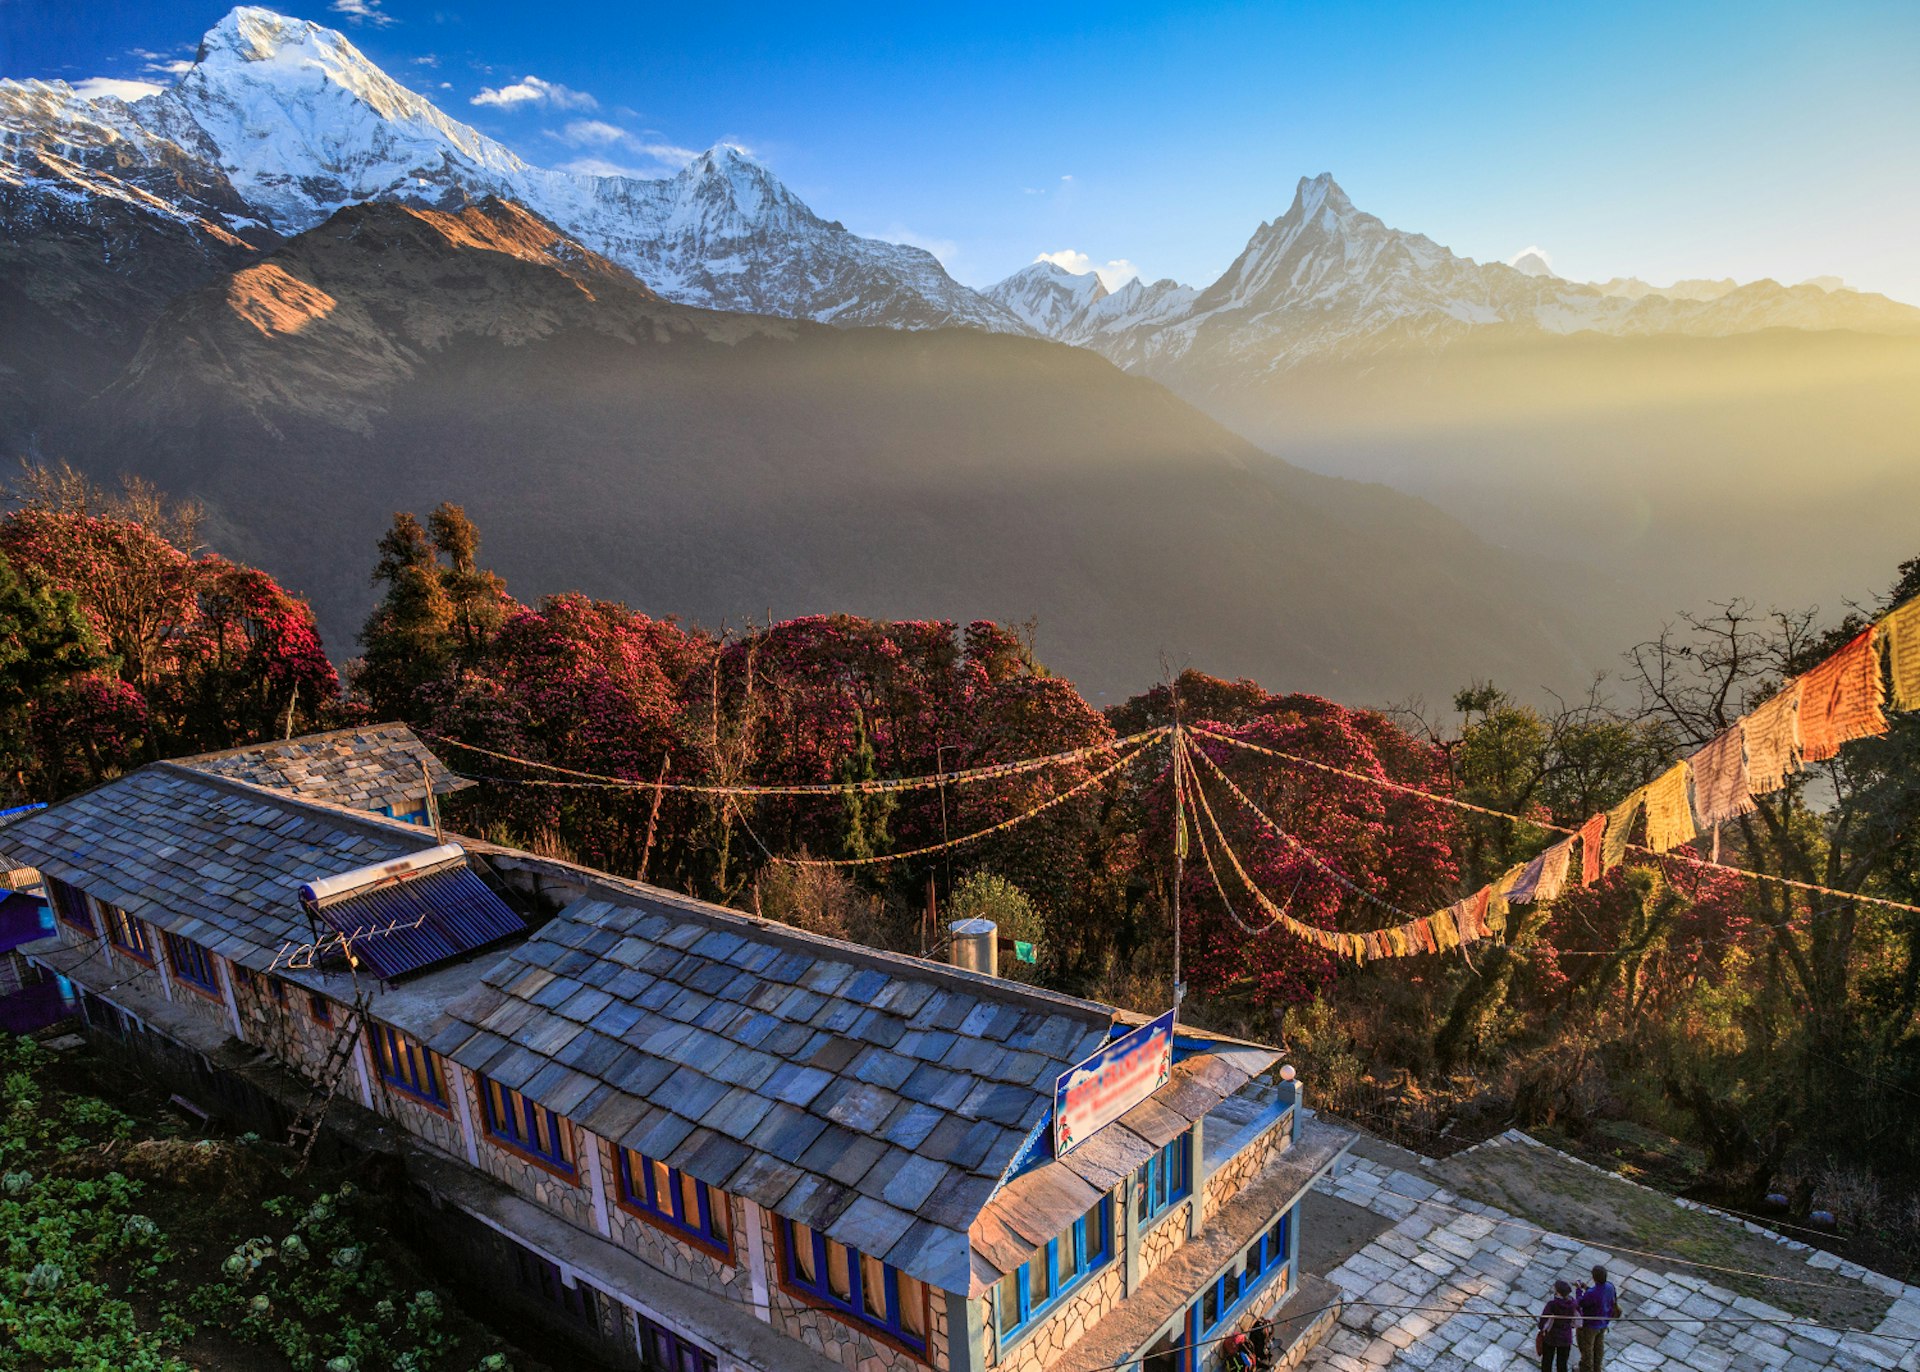 Trekking lodge at Tatopani, Annapurna Region. Image by Feng Wei Photography / Getty Images.